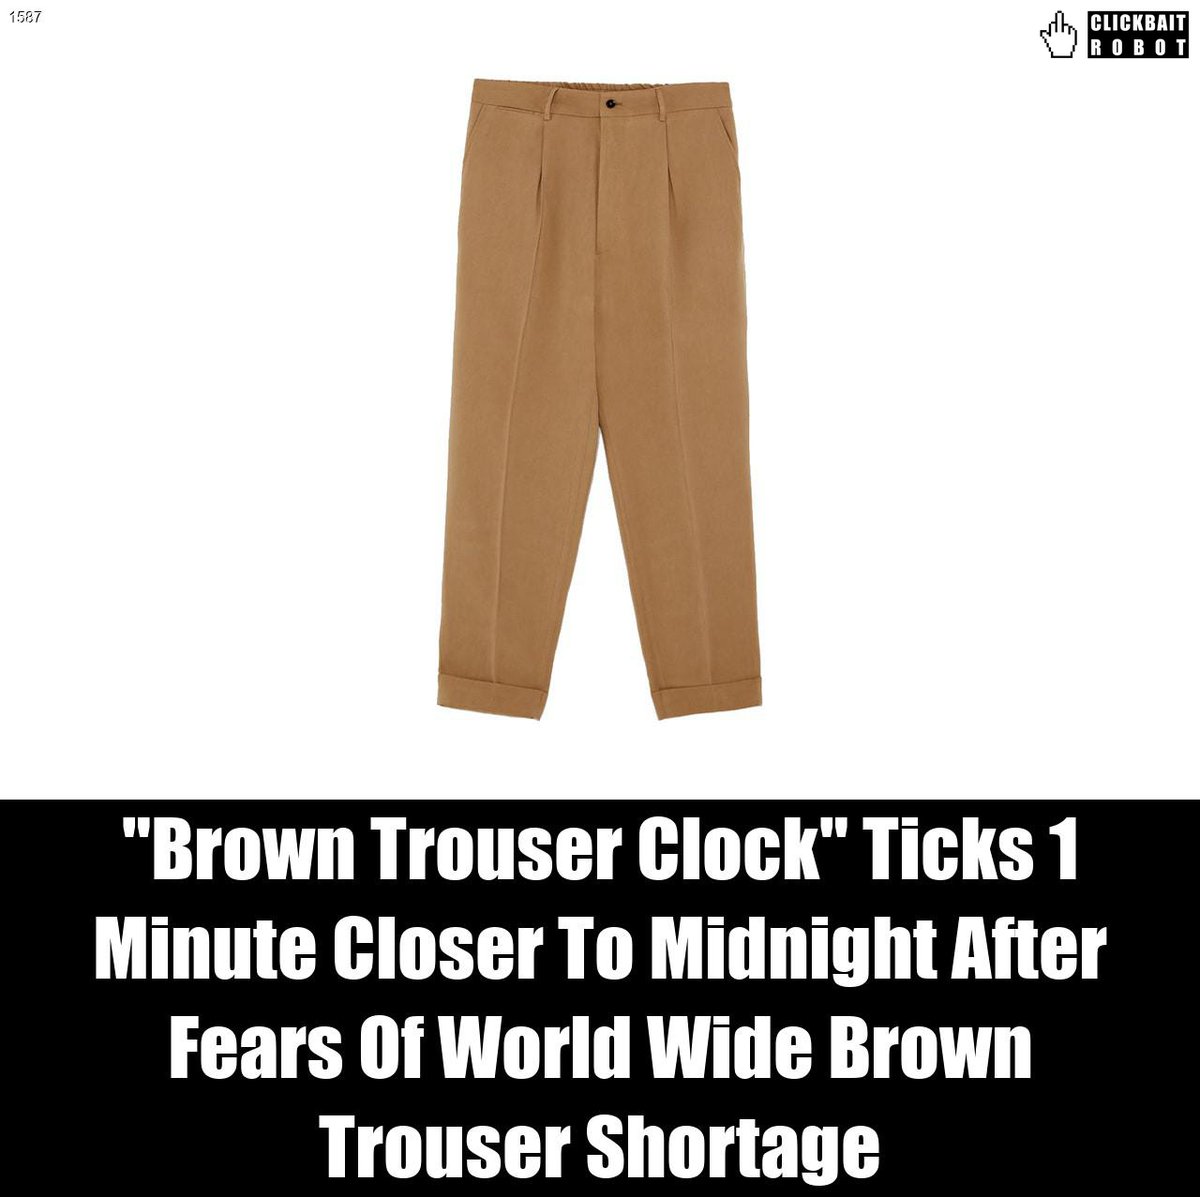 'Brown Trouser Clock' Ticks 1 Minute Closer To Midnight After Fears Of World Wide Brown Trouser Shortage #BrownTrouser